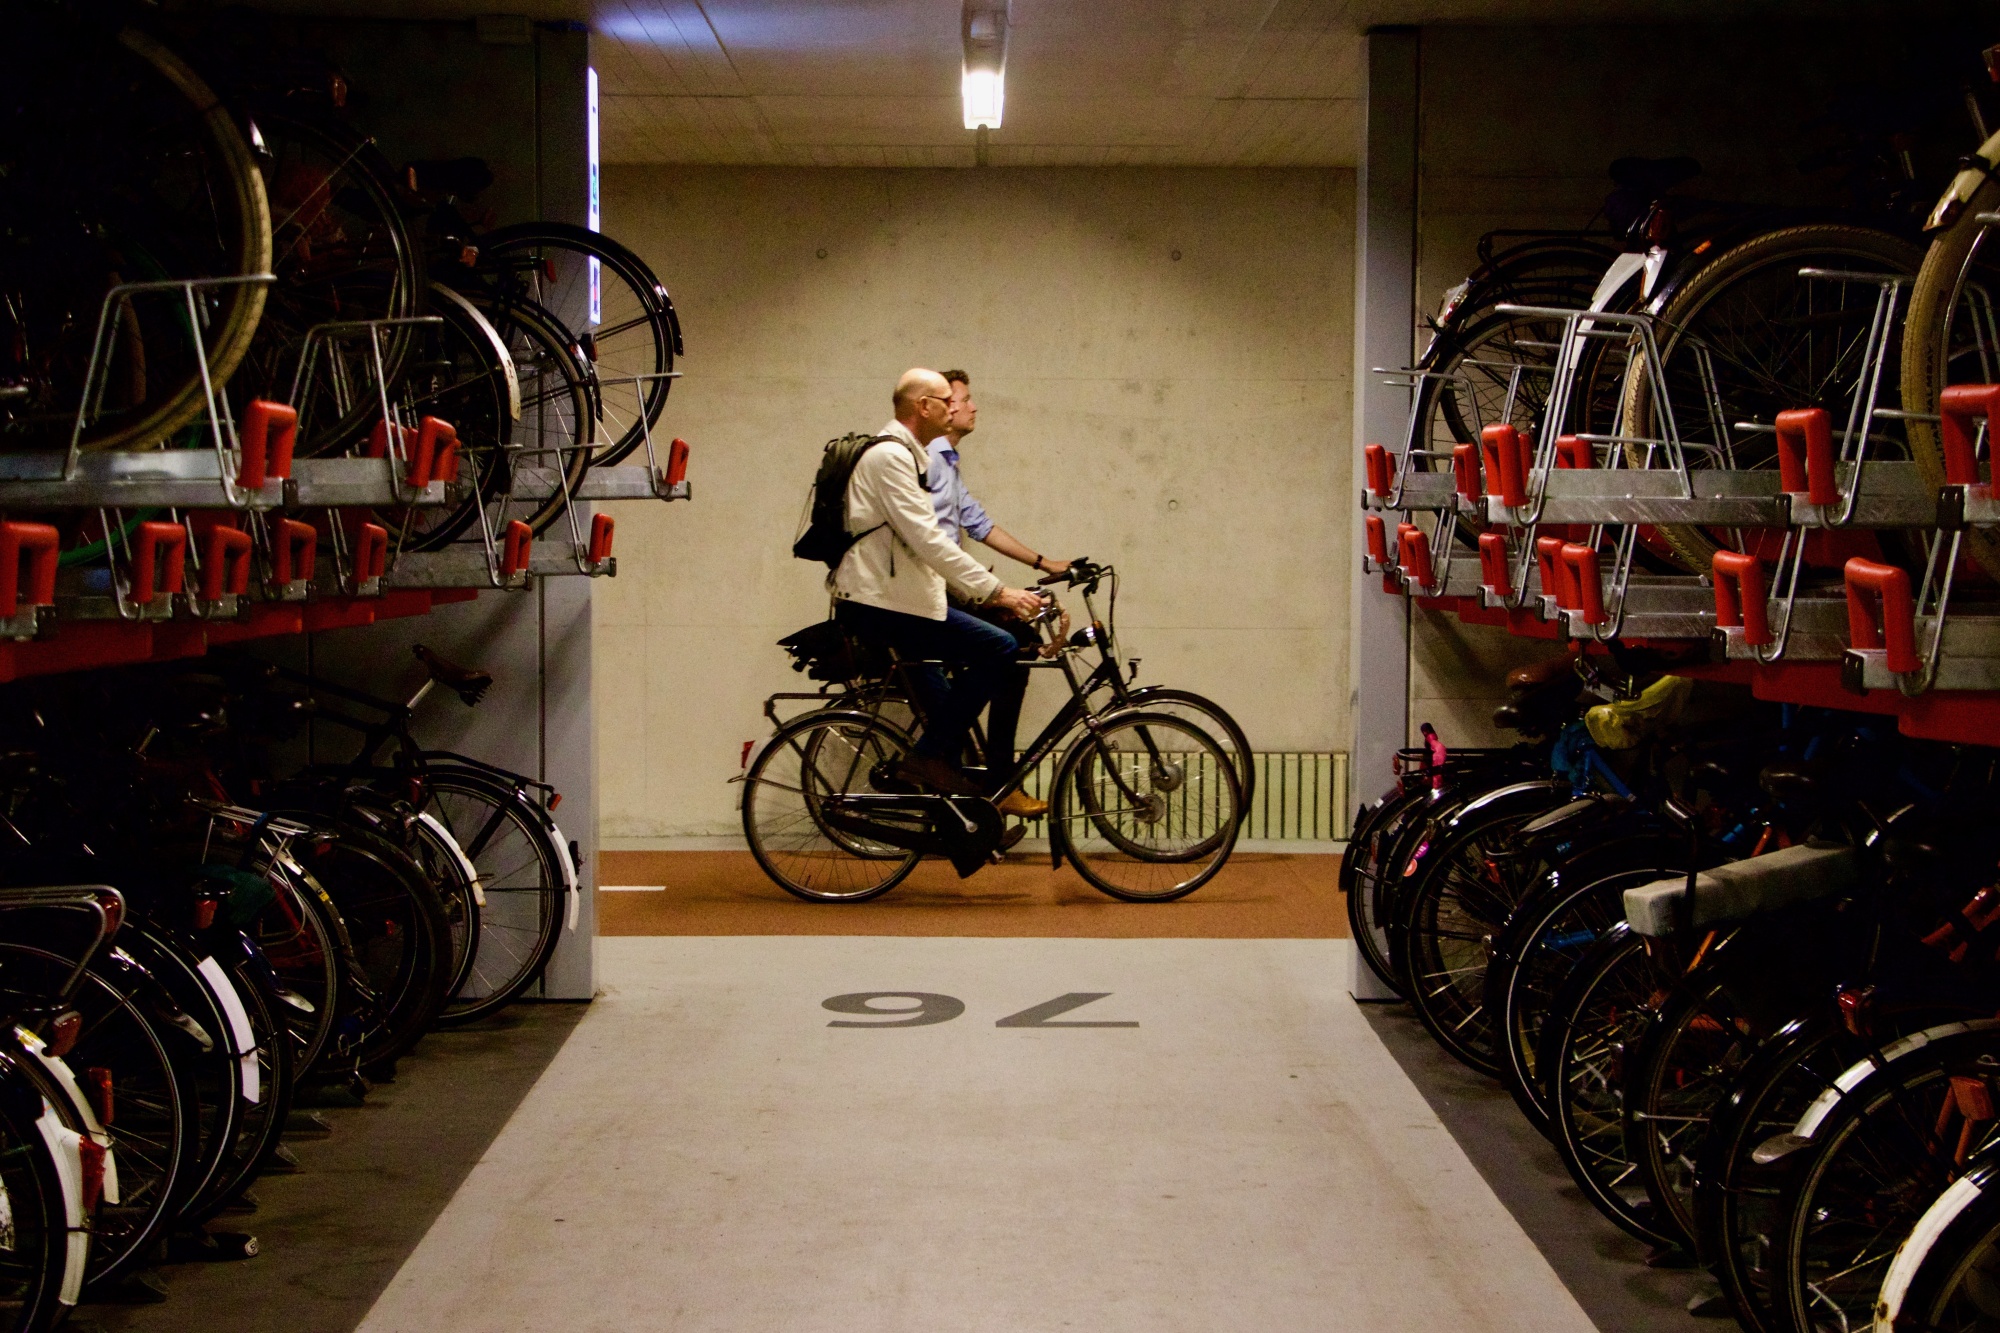 Utrecht’s train station can hold 22,000 bicycles —&nbsp;the largest bike garage in the world.&nbsp;